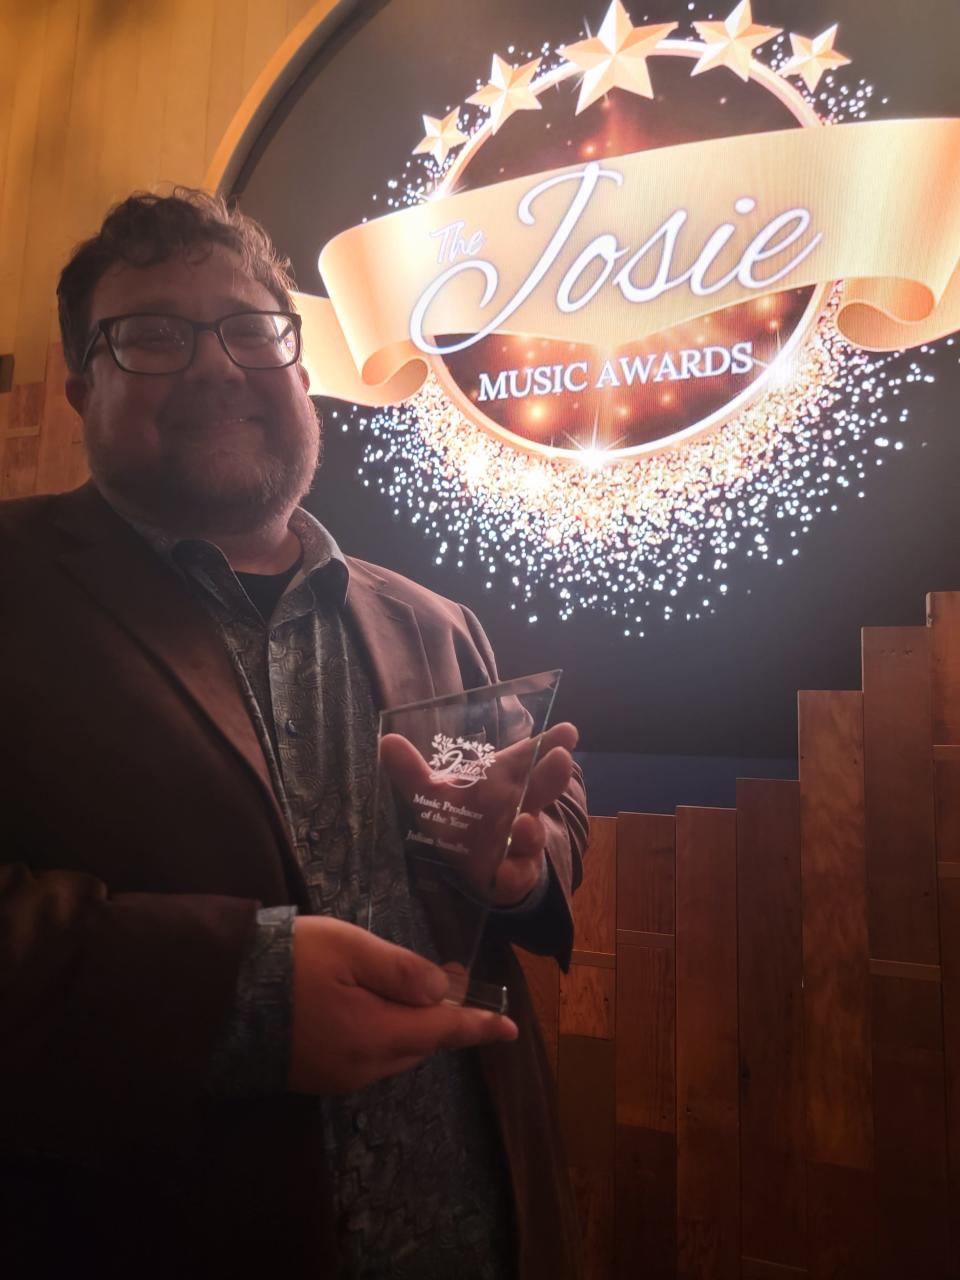 Julian Sundby of The Fort Studios shows off his trophy after winning Music Producer of the Year on Oct. 22 at the annual Josie Music Awards.